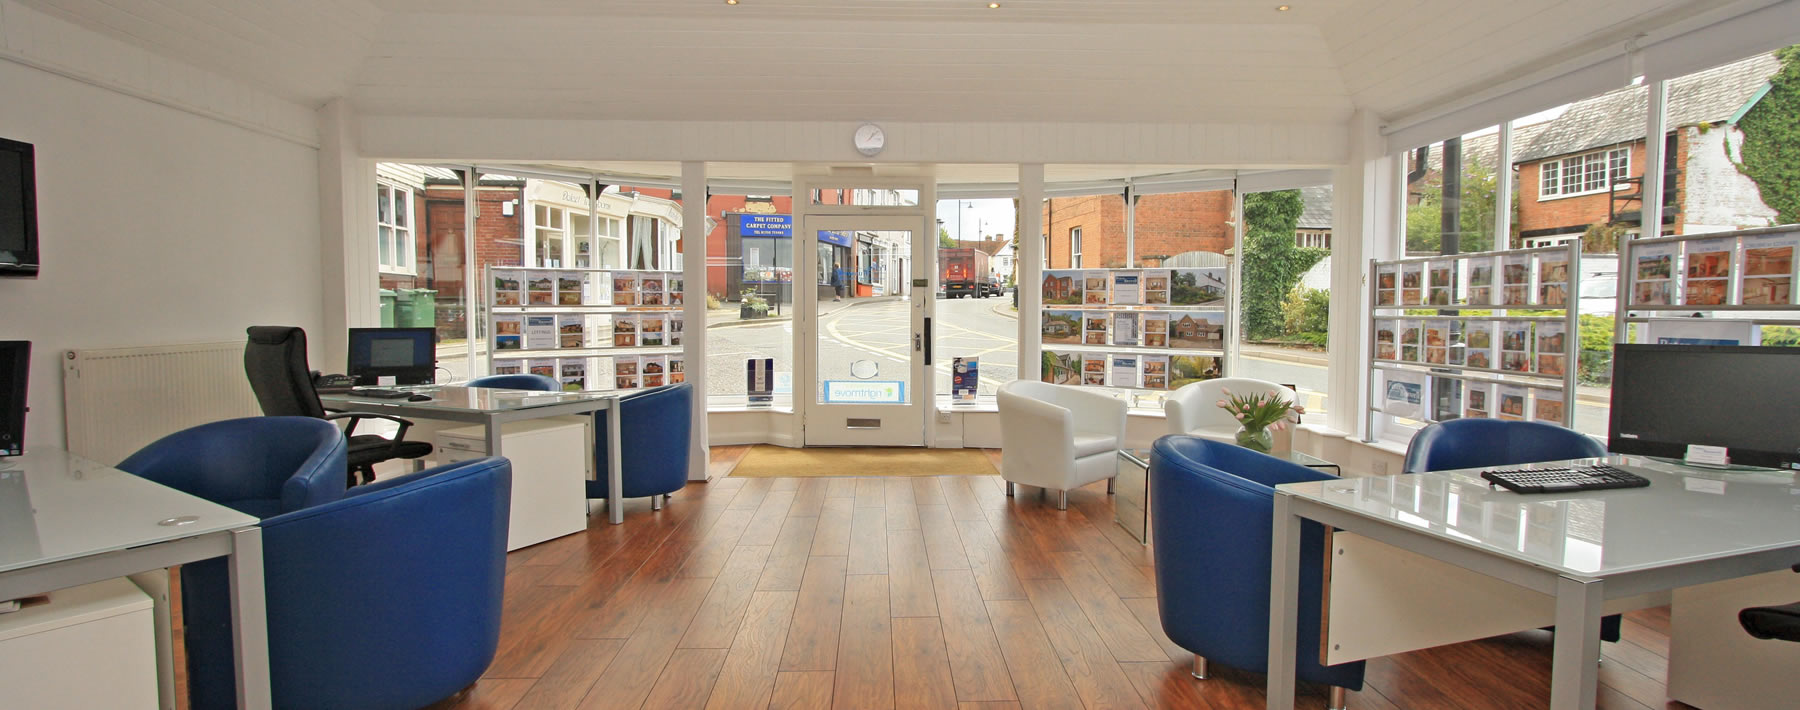 Peter Buswell Estate Agents